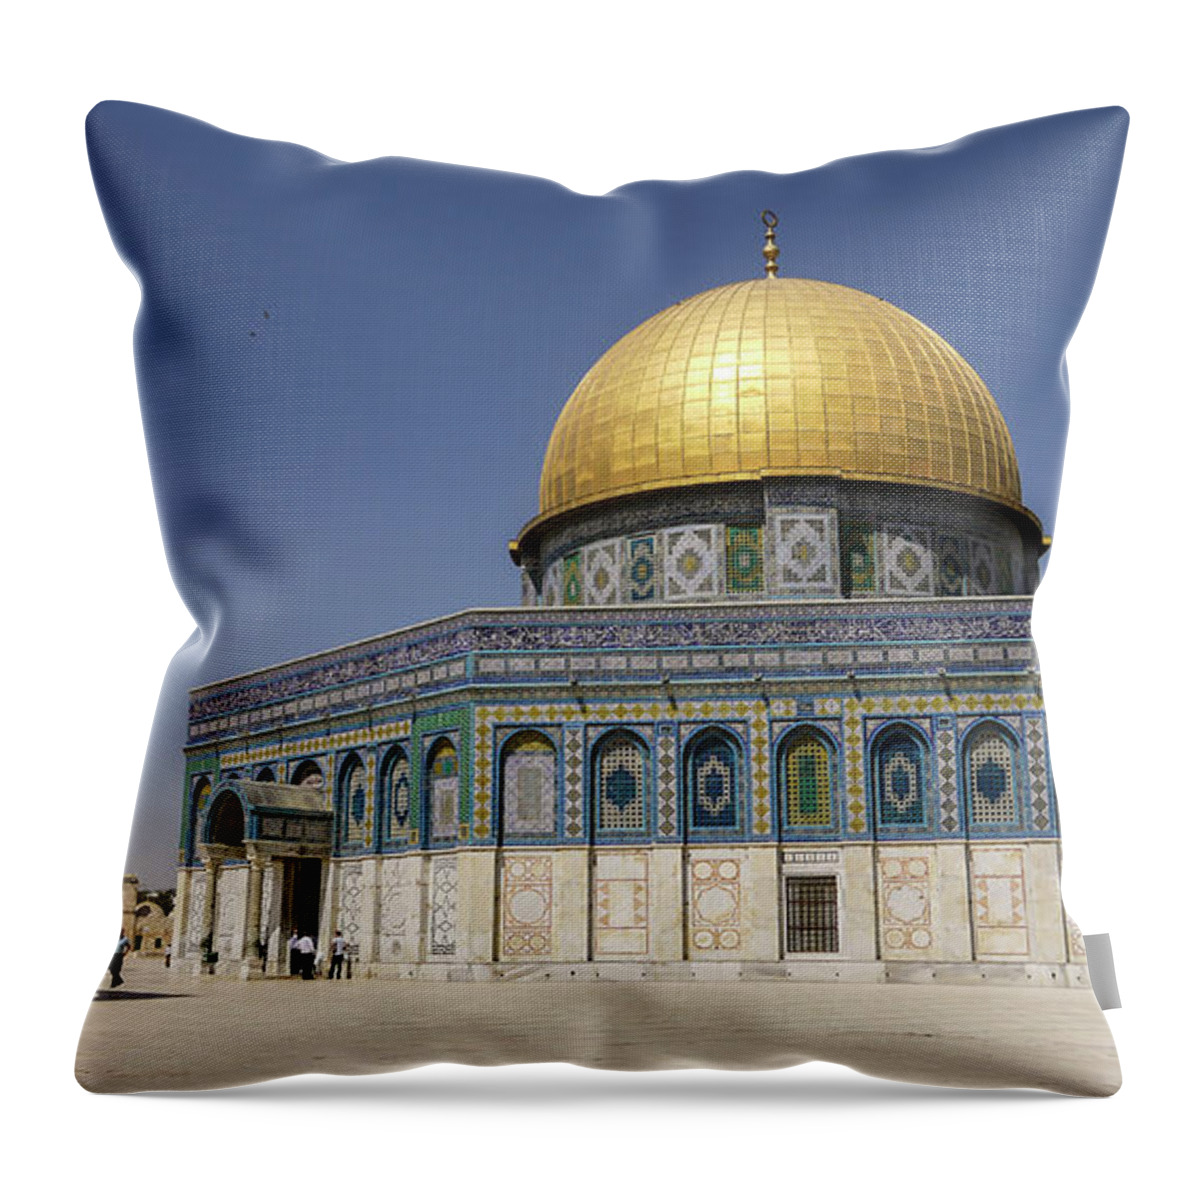 Arch Throw Pillow featuring the photograph Dome Of Rock by Photography By Daniel Frauchiger, Switzerland